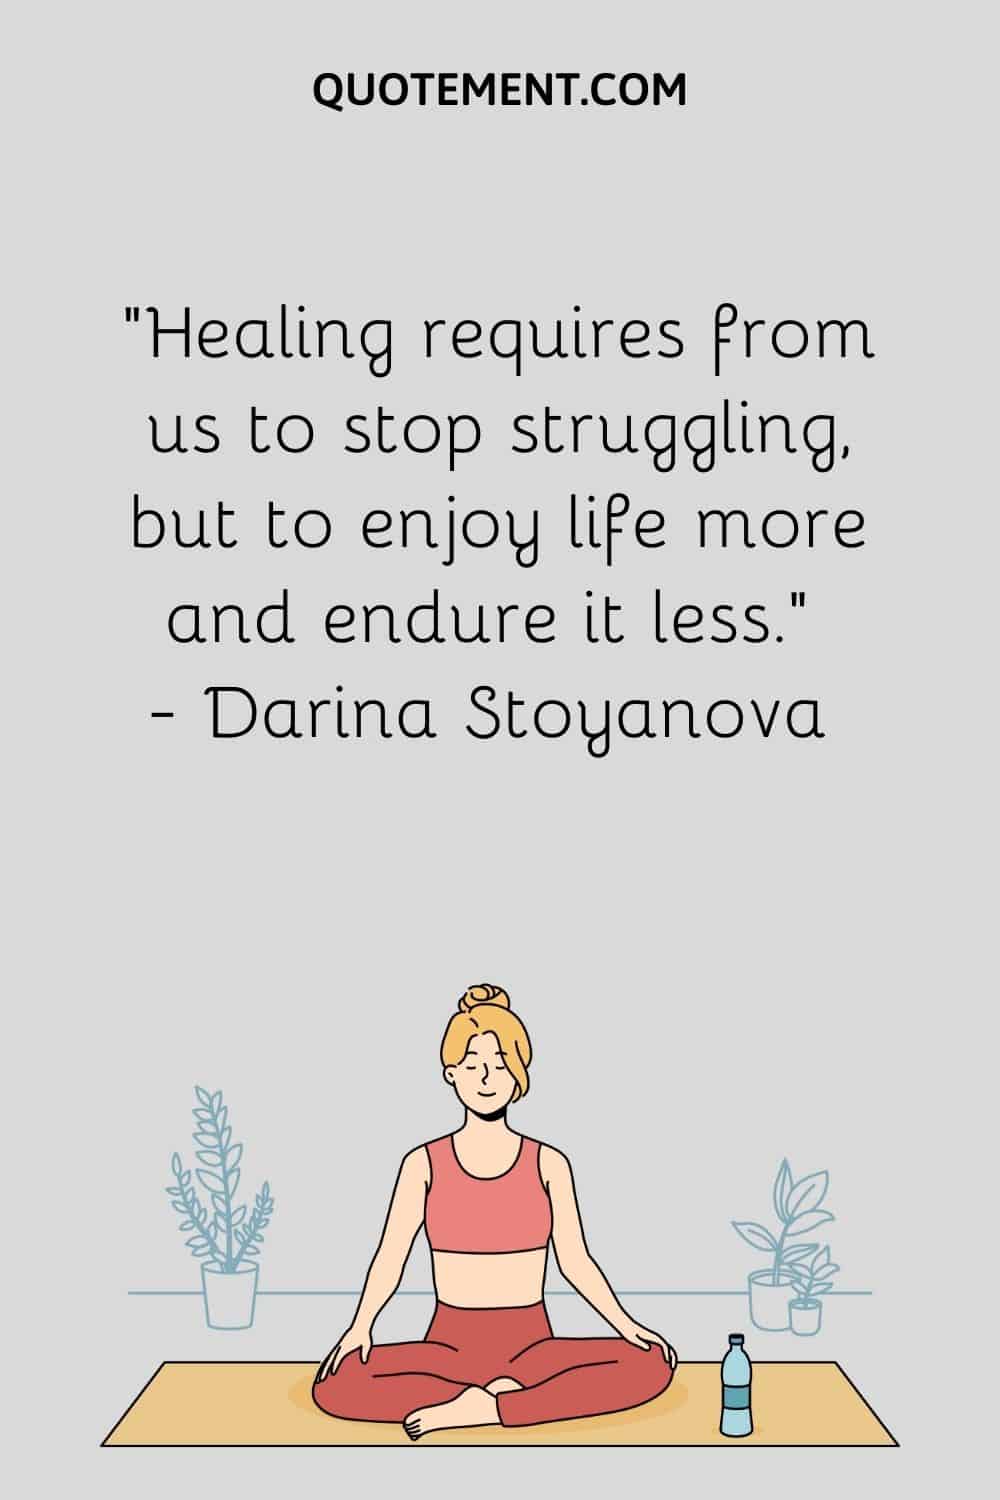 Healing requires from us to stop struggling, but to enjoy life more and endure it less